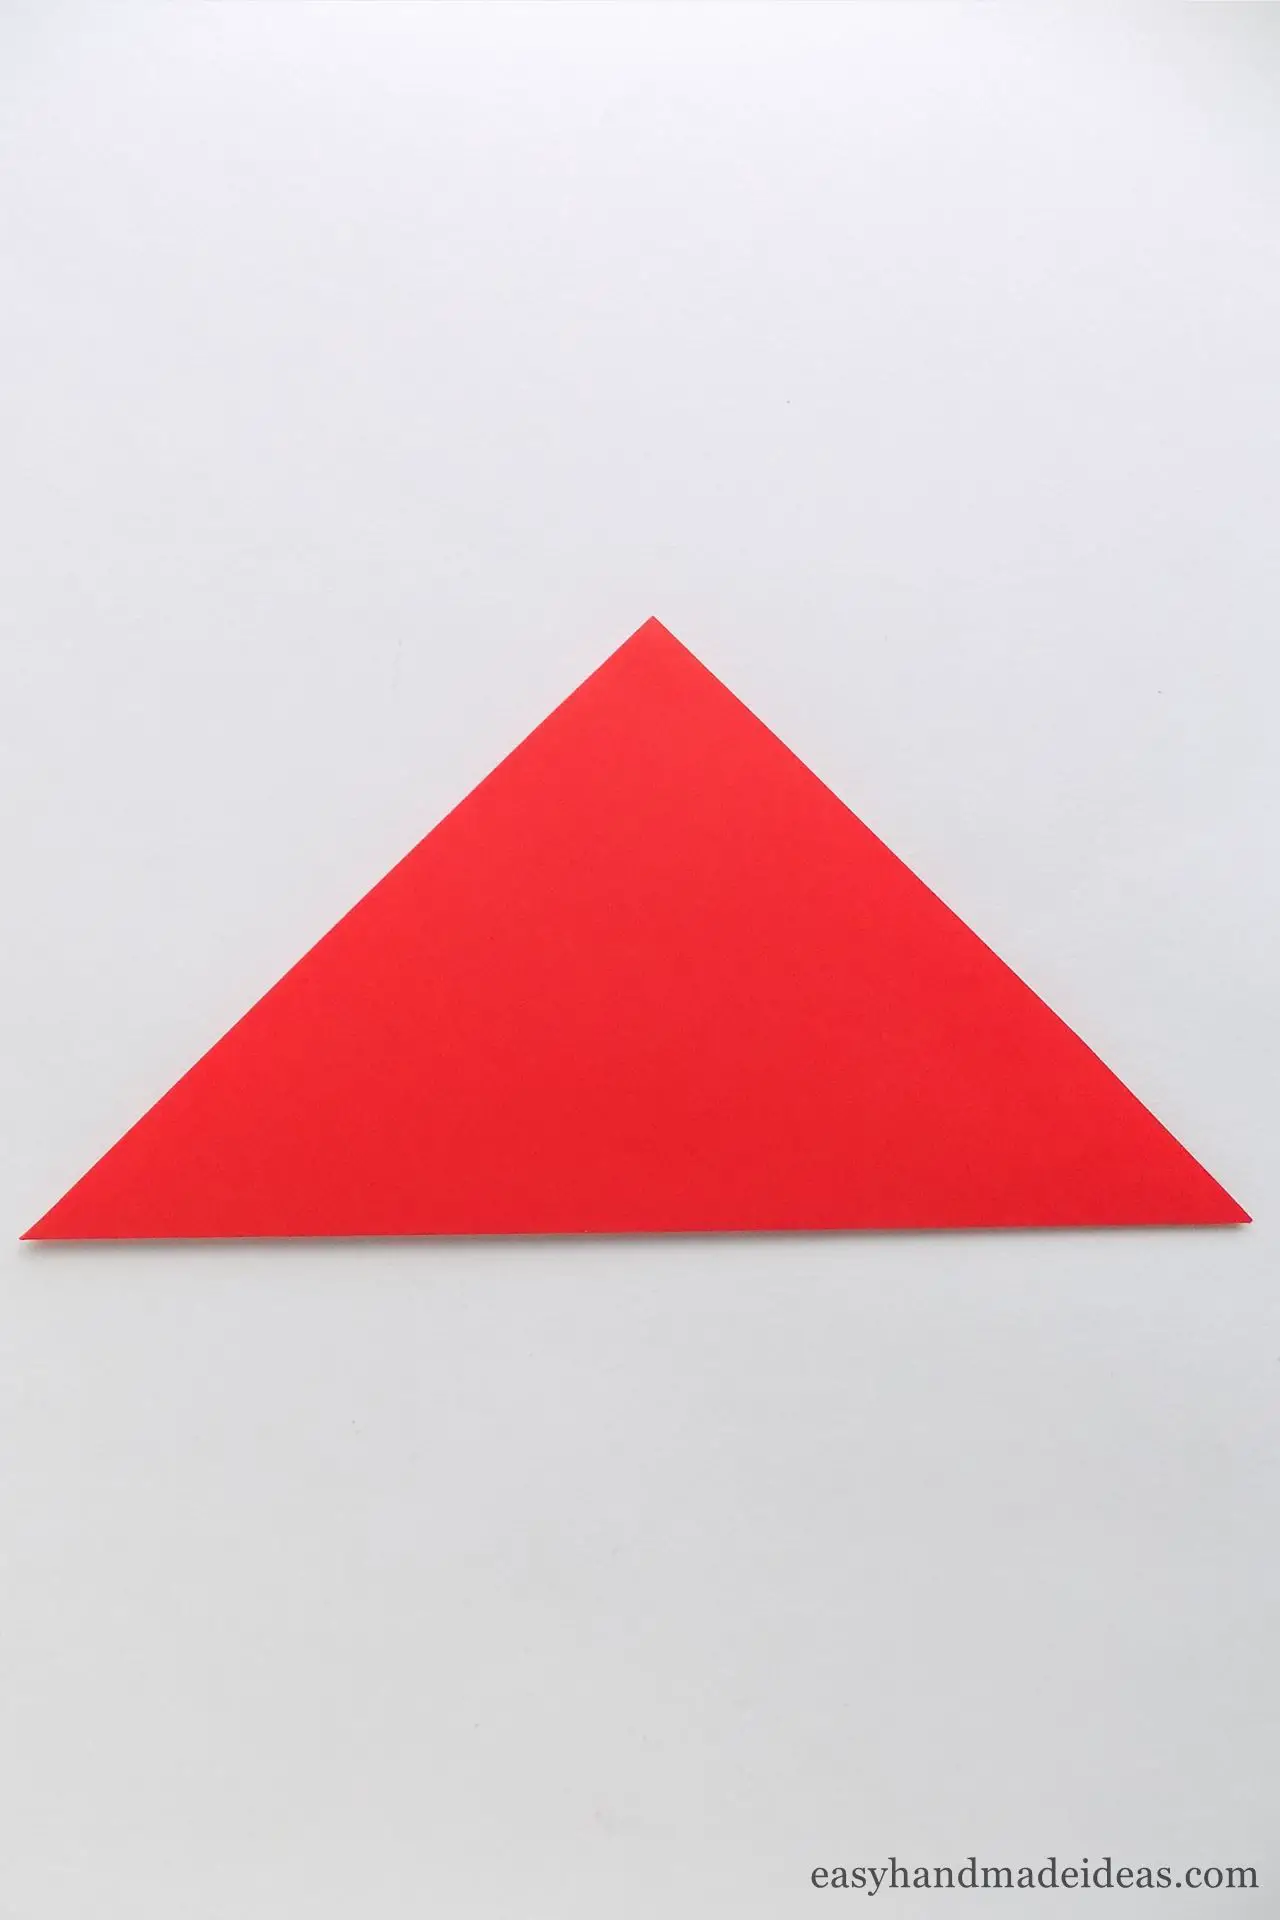 Make a triangle from the square